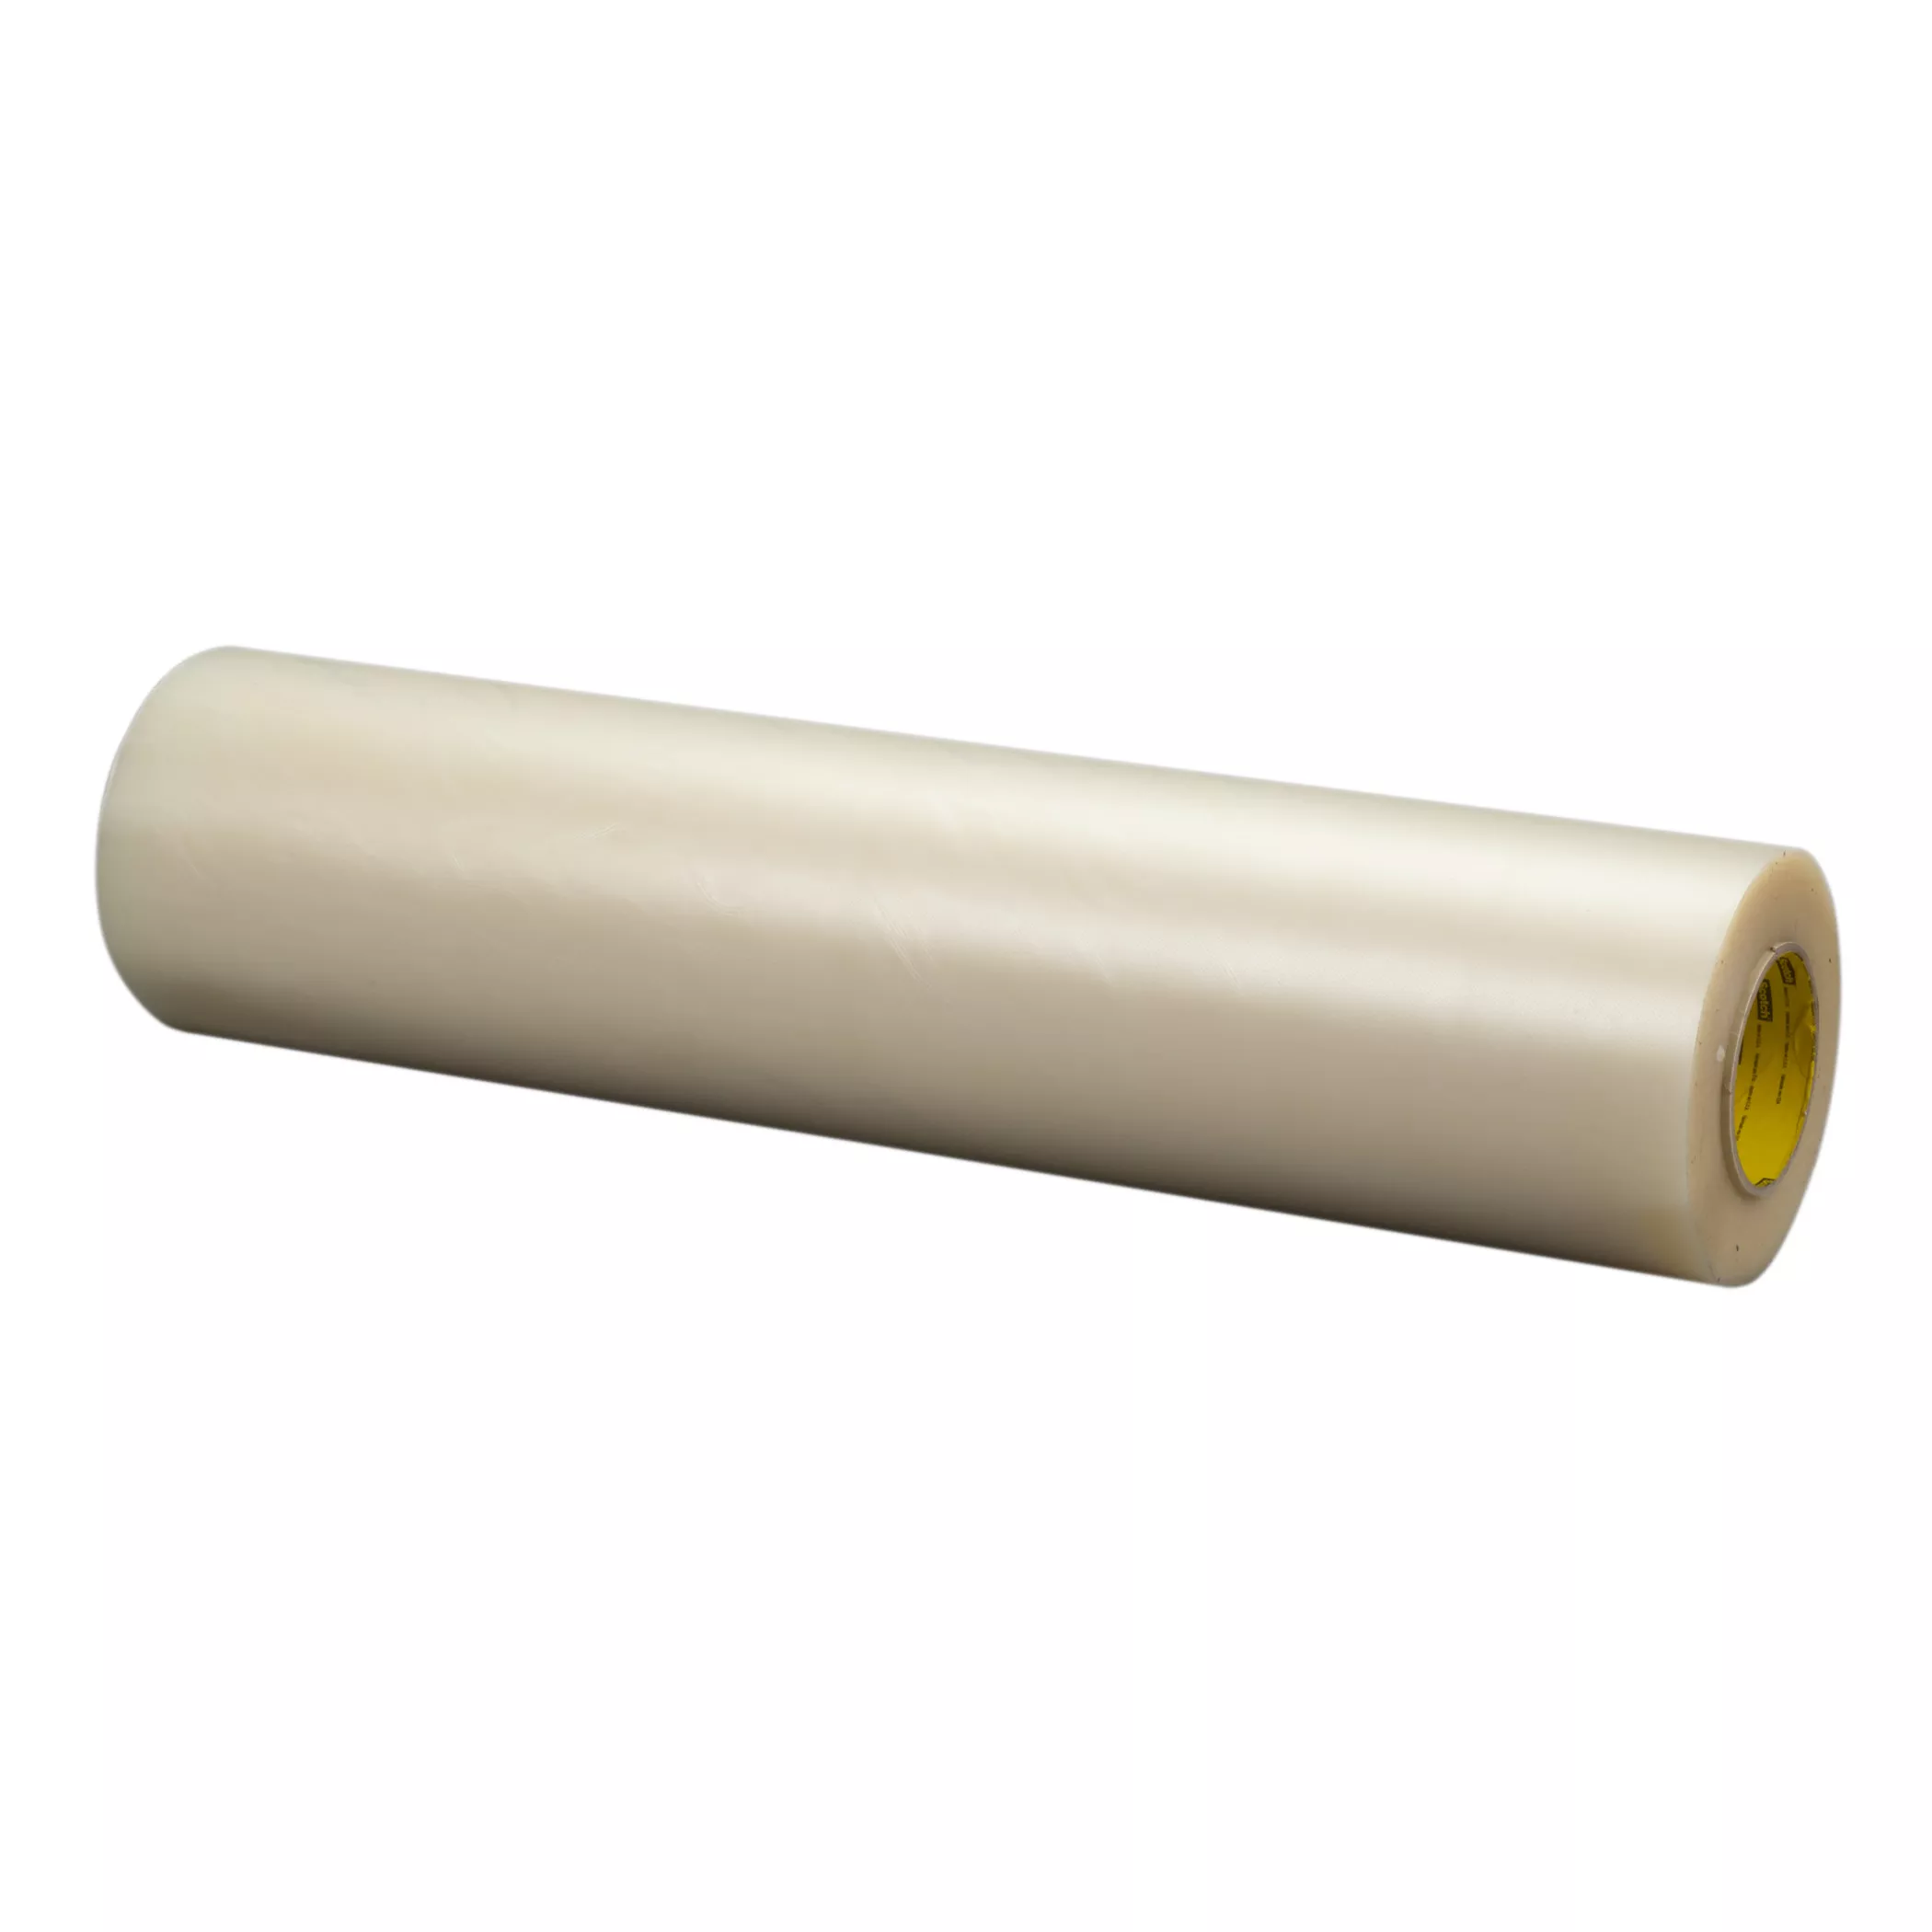 3M™ Thin Flexographic Plate Mounting Tape 2205FL, Translucent, 54 in x
60 yd, 5 mil, 1 Roll/Case